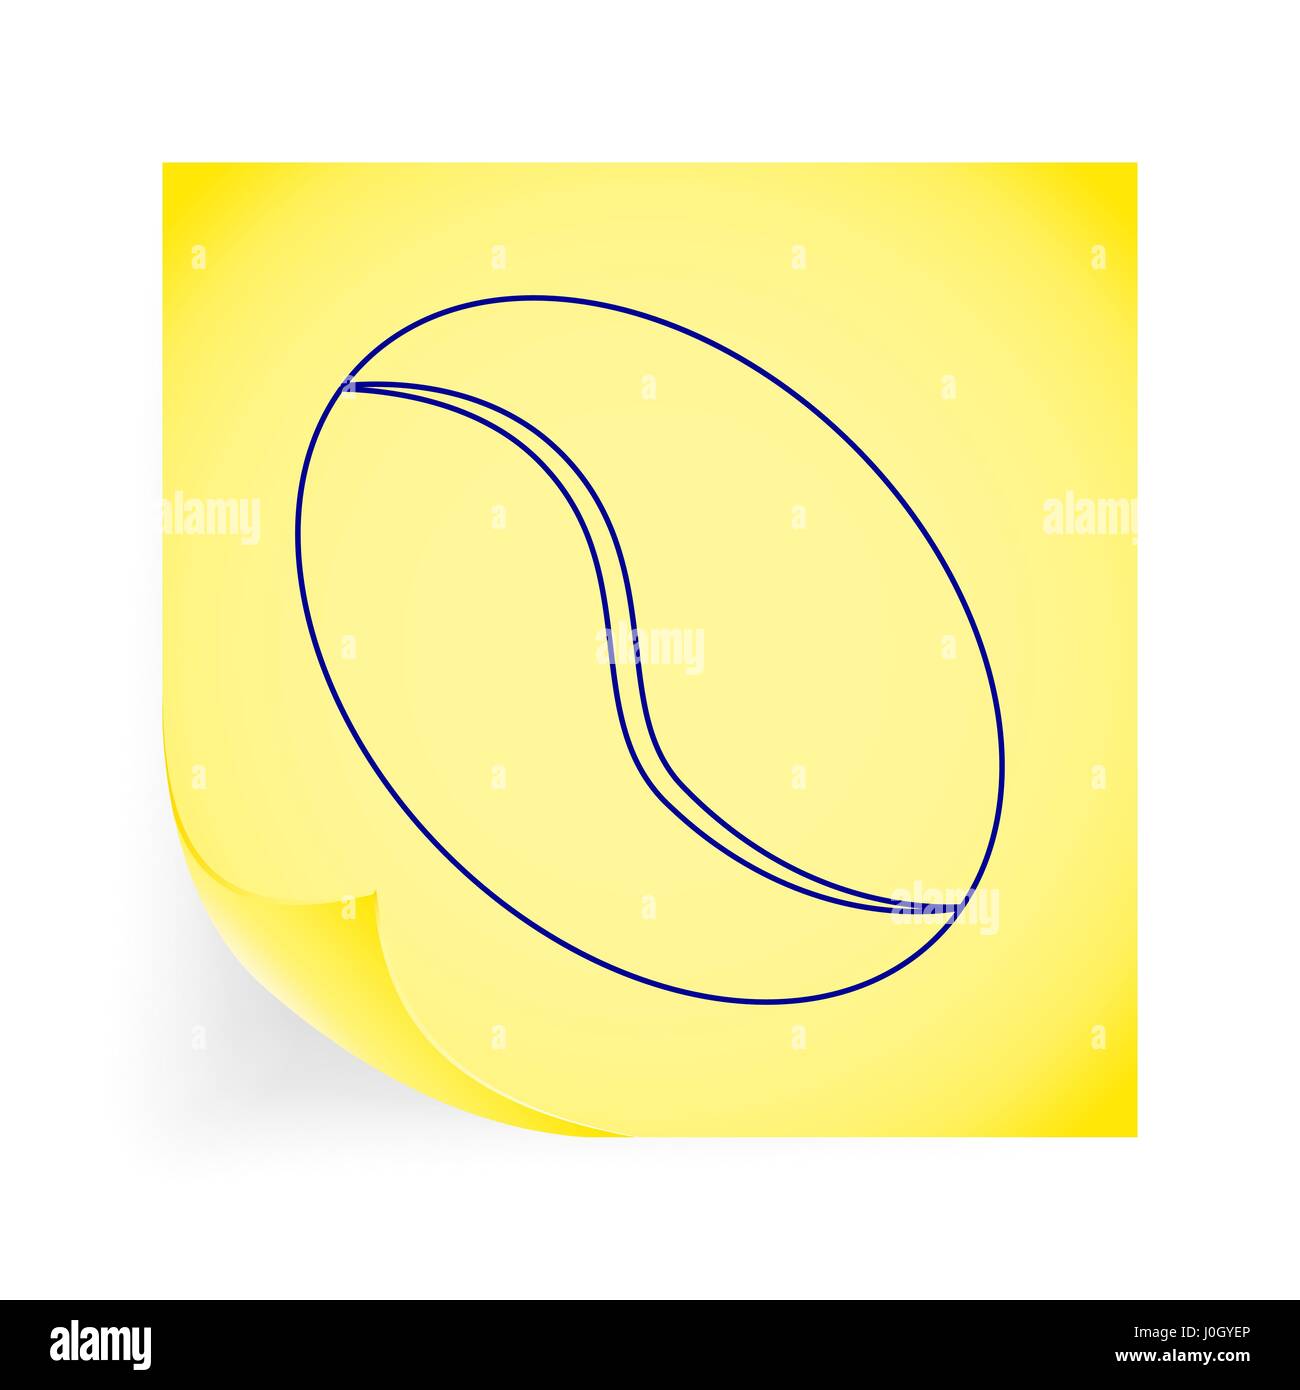 Coffee bean. Single icon on the yellow note paper. Vector illustration. Stock Vector